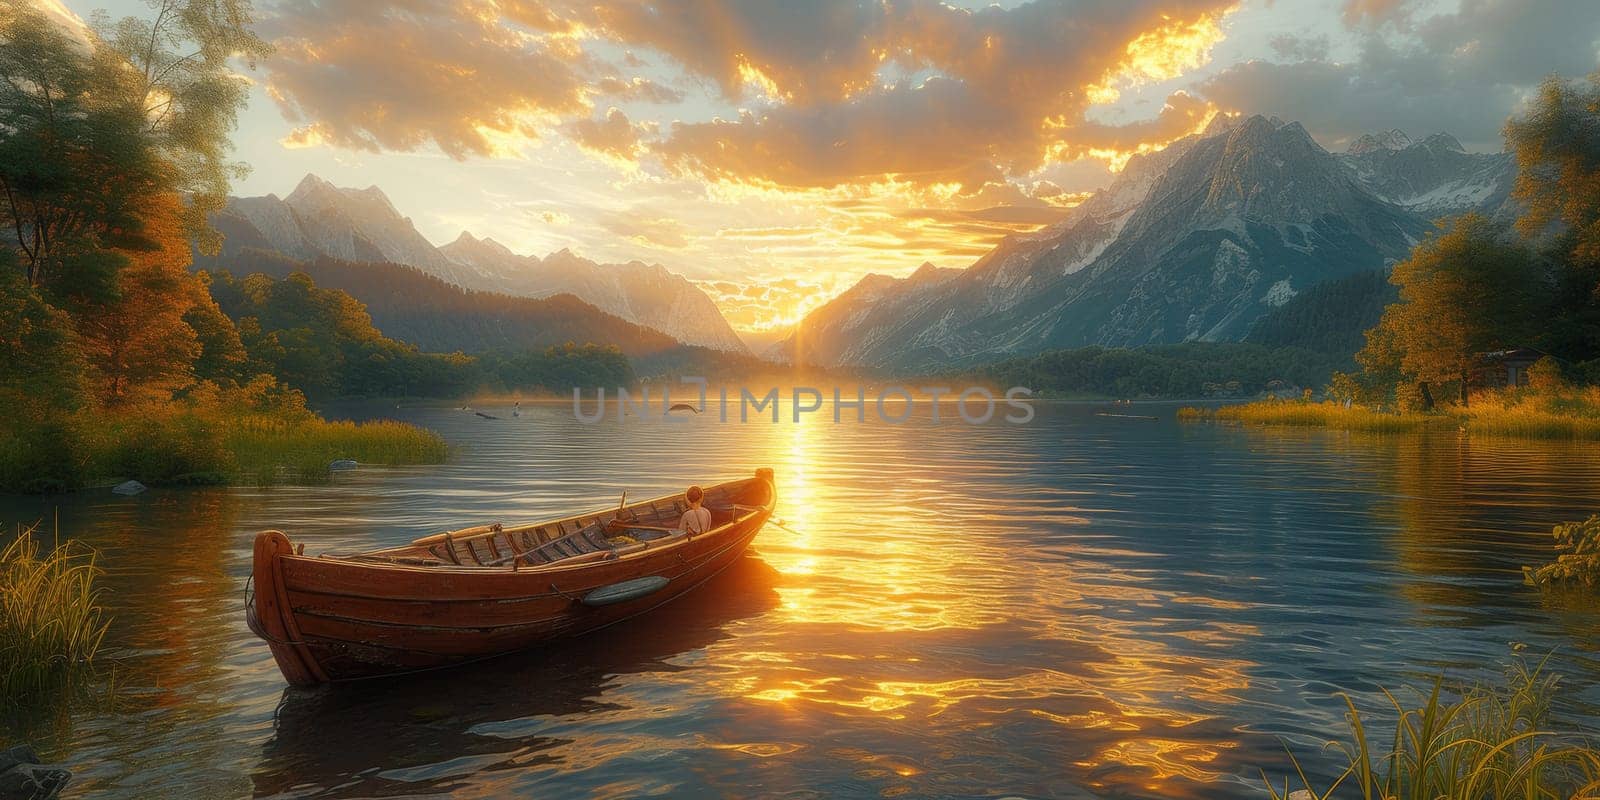 A boat on a lake at sunset with mountains in the background